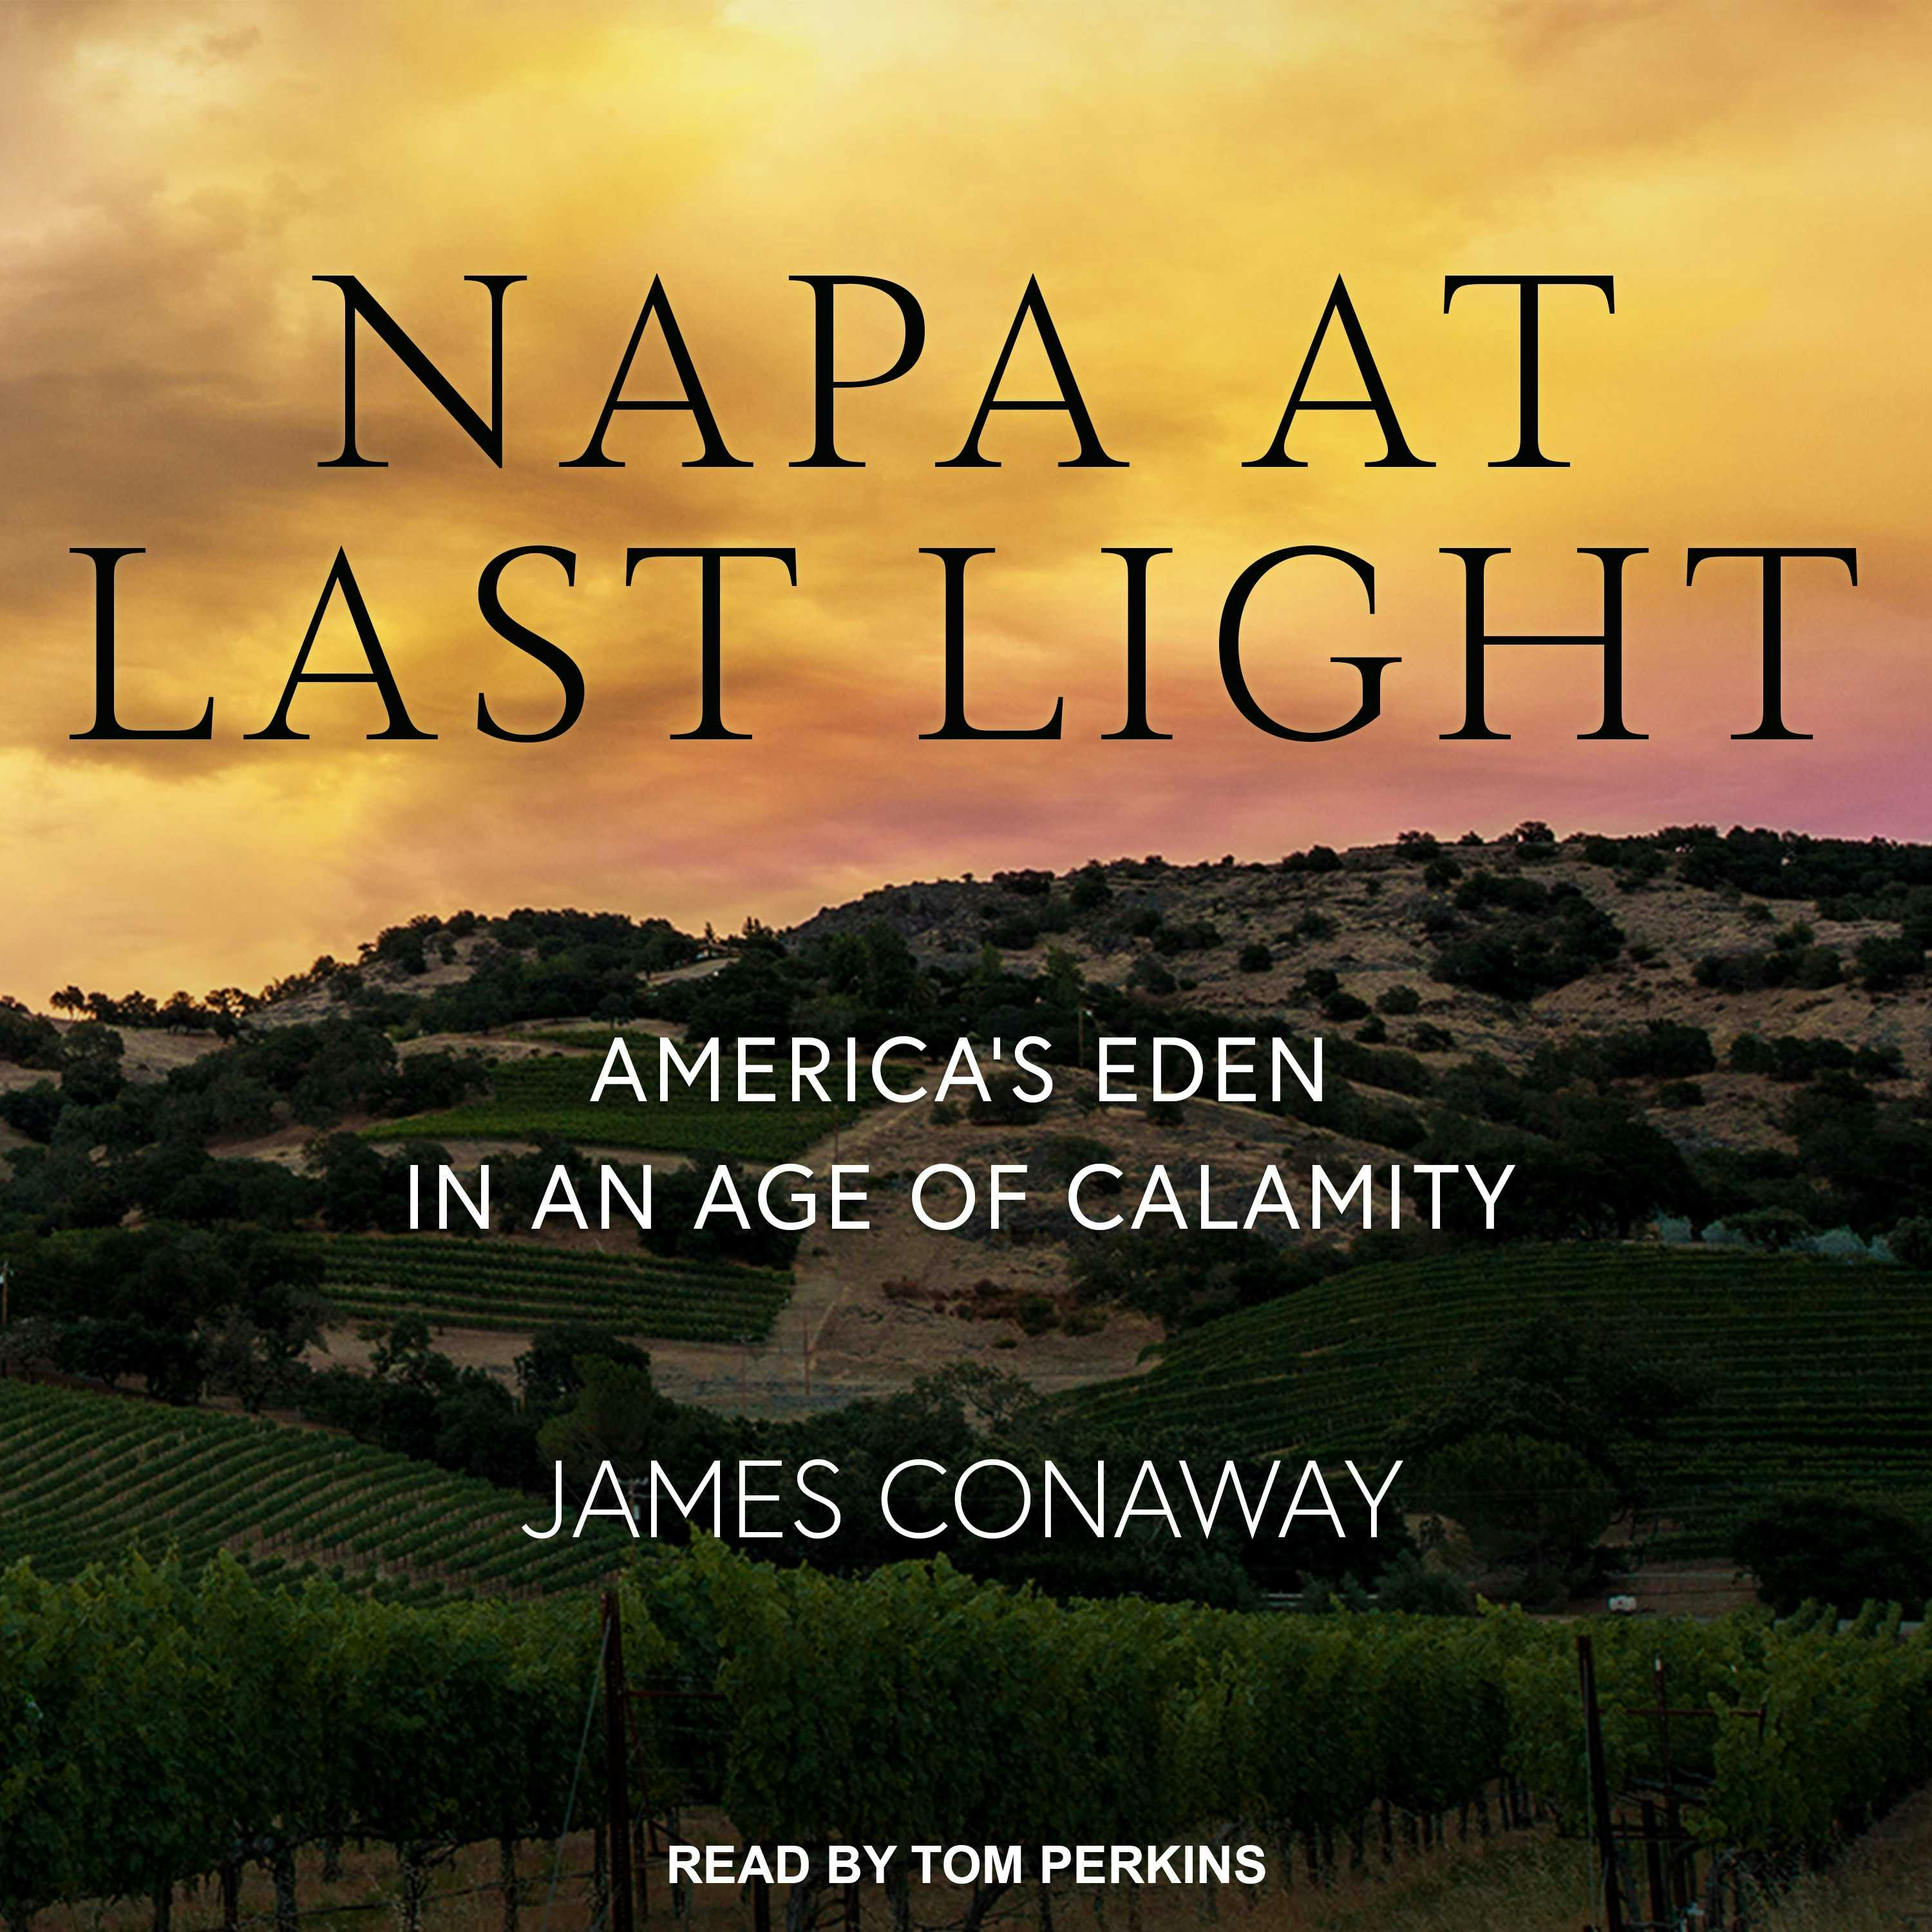 Napa at Last Light: America's Eden in an Age of Calamity - James Conaway